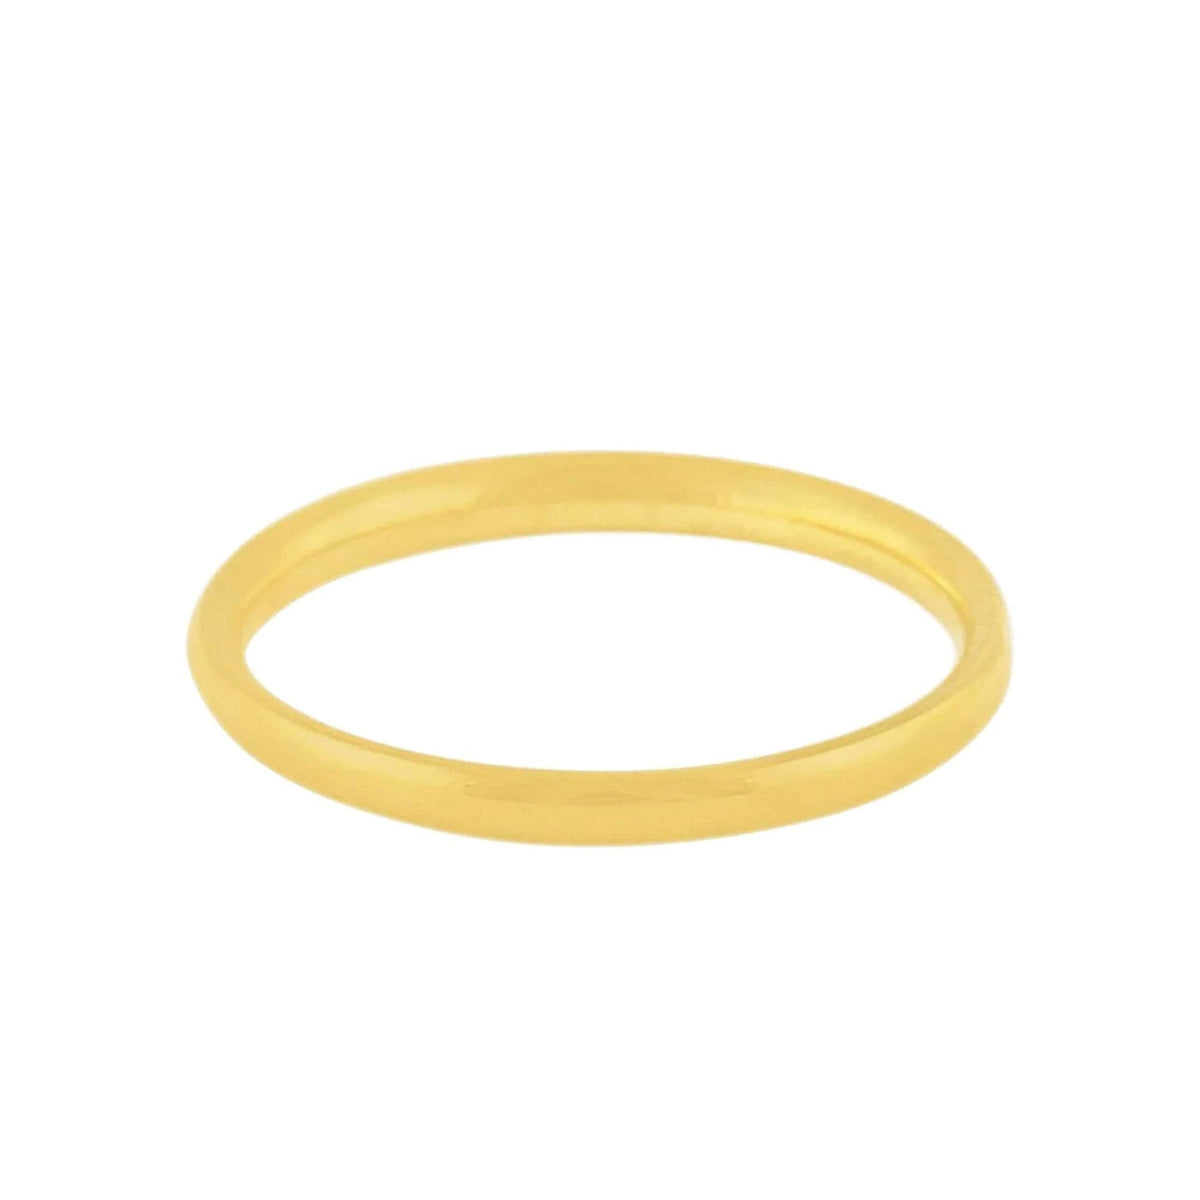 BohoMoon Stainless Steel Plain Band Ring Gold / US 6 / UK L / EUR 51 (small)